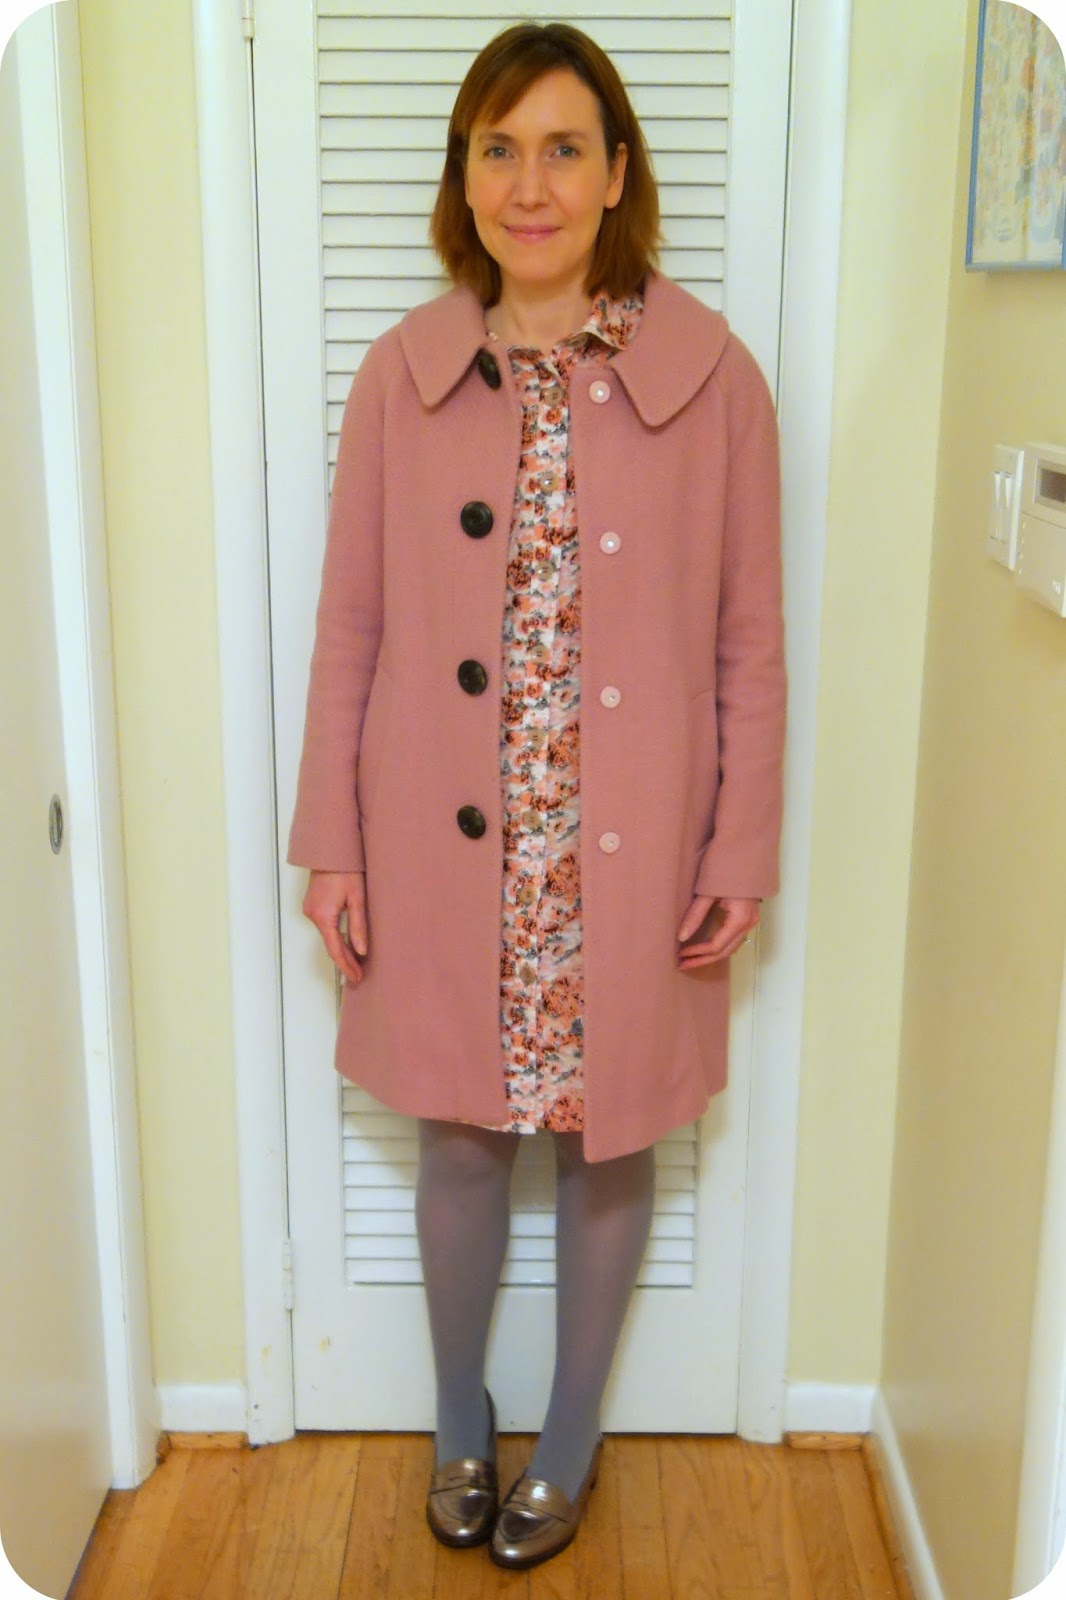 Made by a Fabricista: Romantic Rayon Challis Rose Dress.